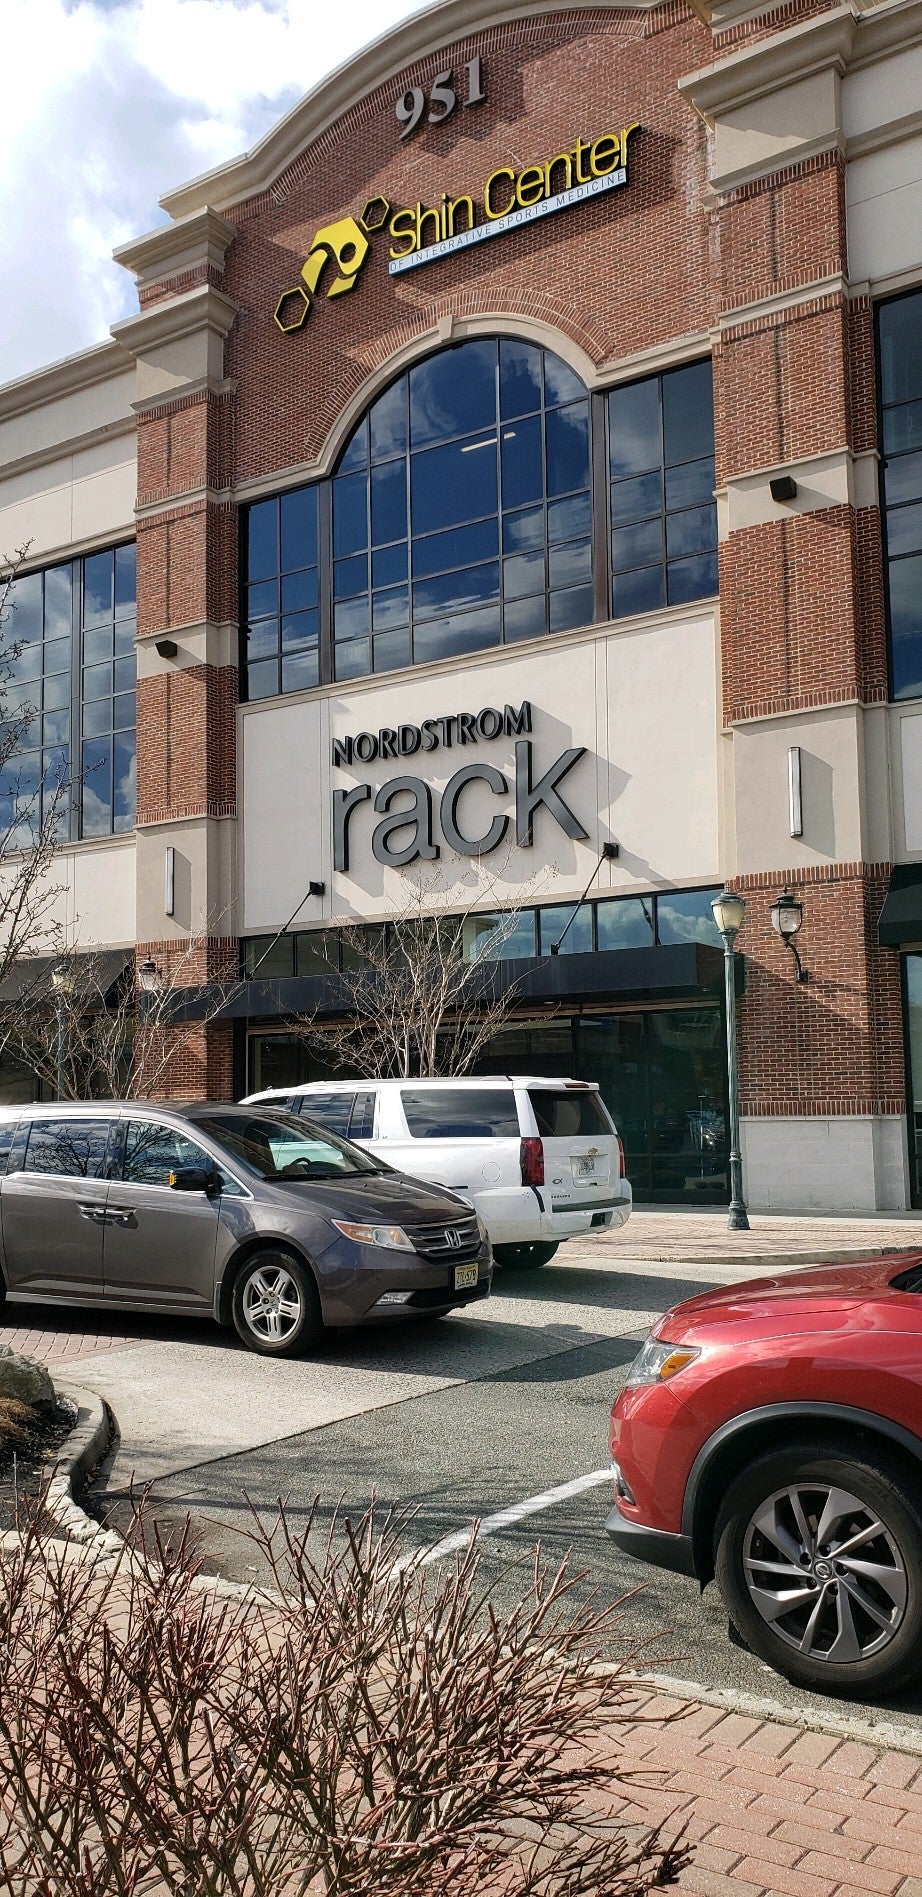 Nordstrom Rack 2019 -From a former employee. 